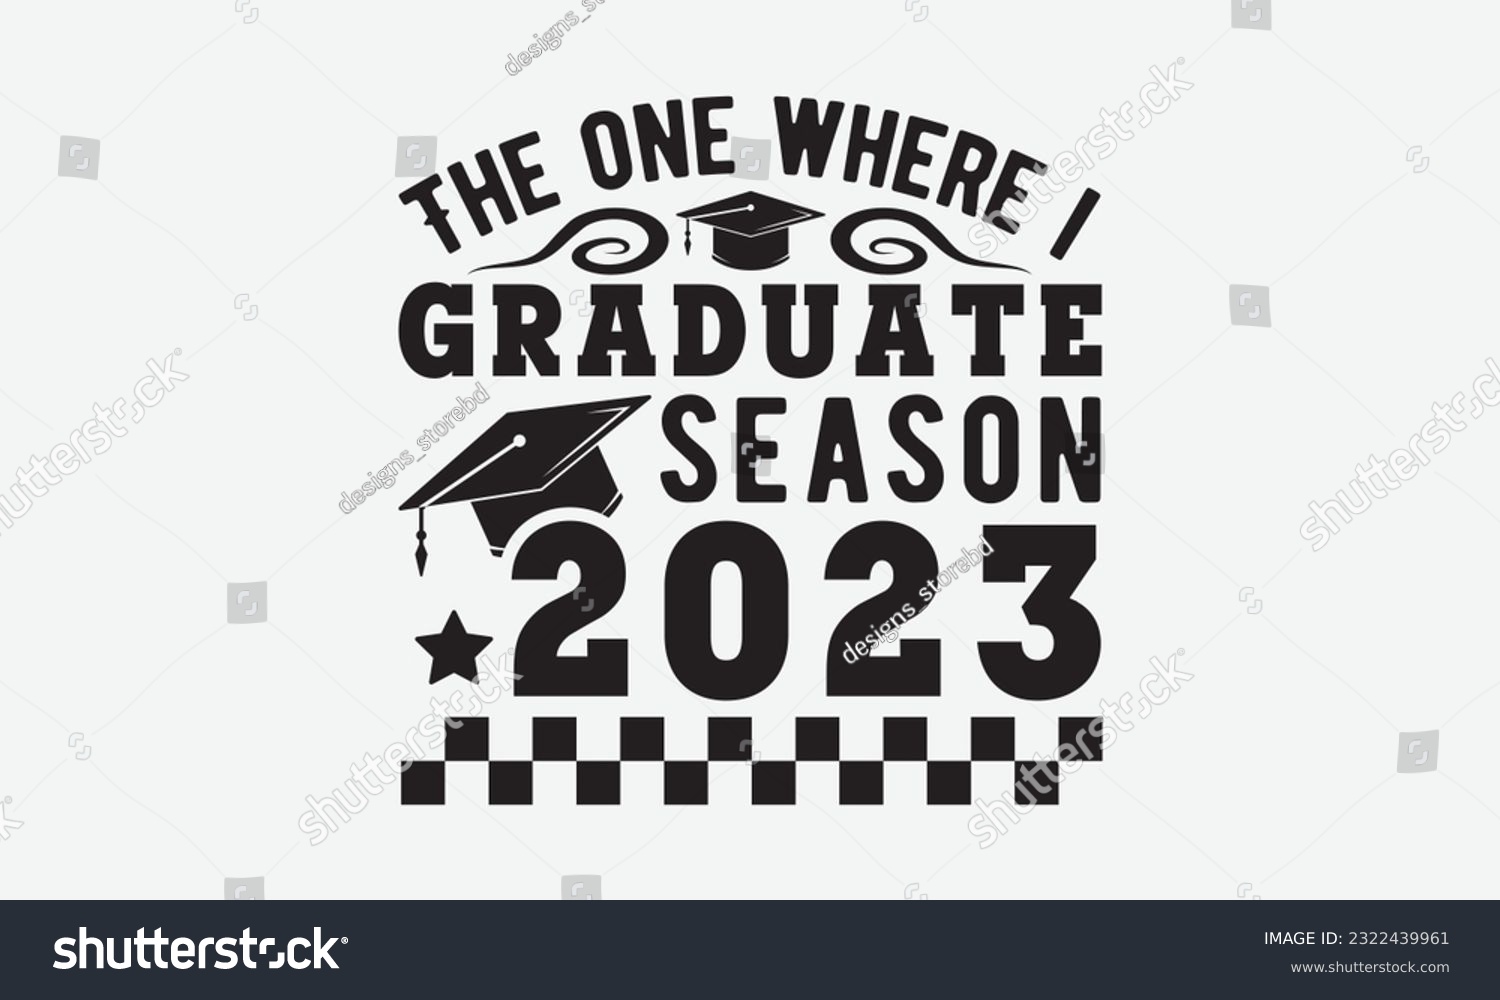 SVG of The one where i graduate season 2023 svg, Graduation SVG , Class of 2023 Graduation SVG Bundle, Graduation cap svg, T shirt Calligraphy phrase for Christmas, Hand drawn lettering for Xmas greetings svg